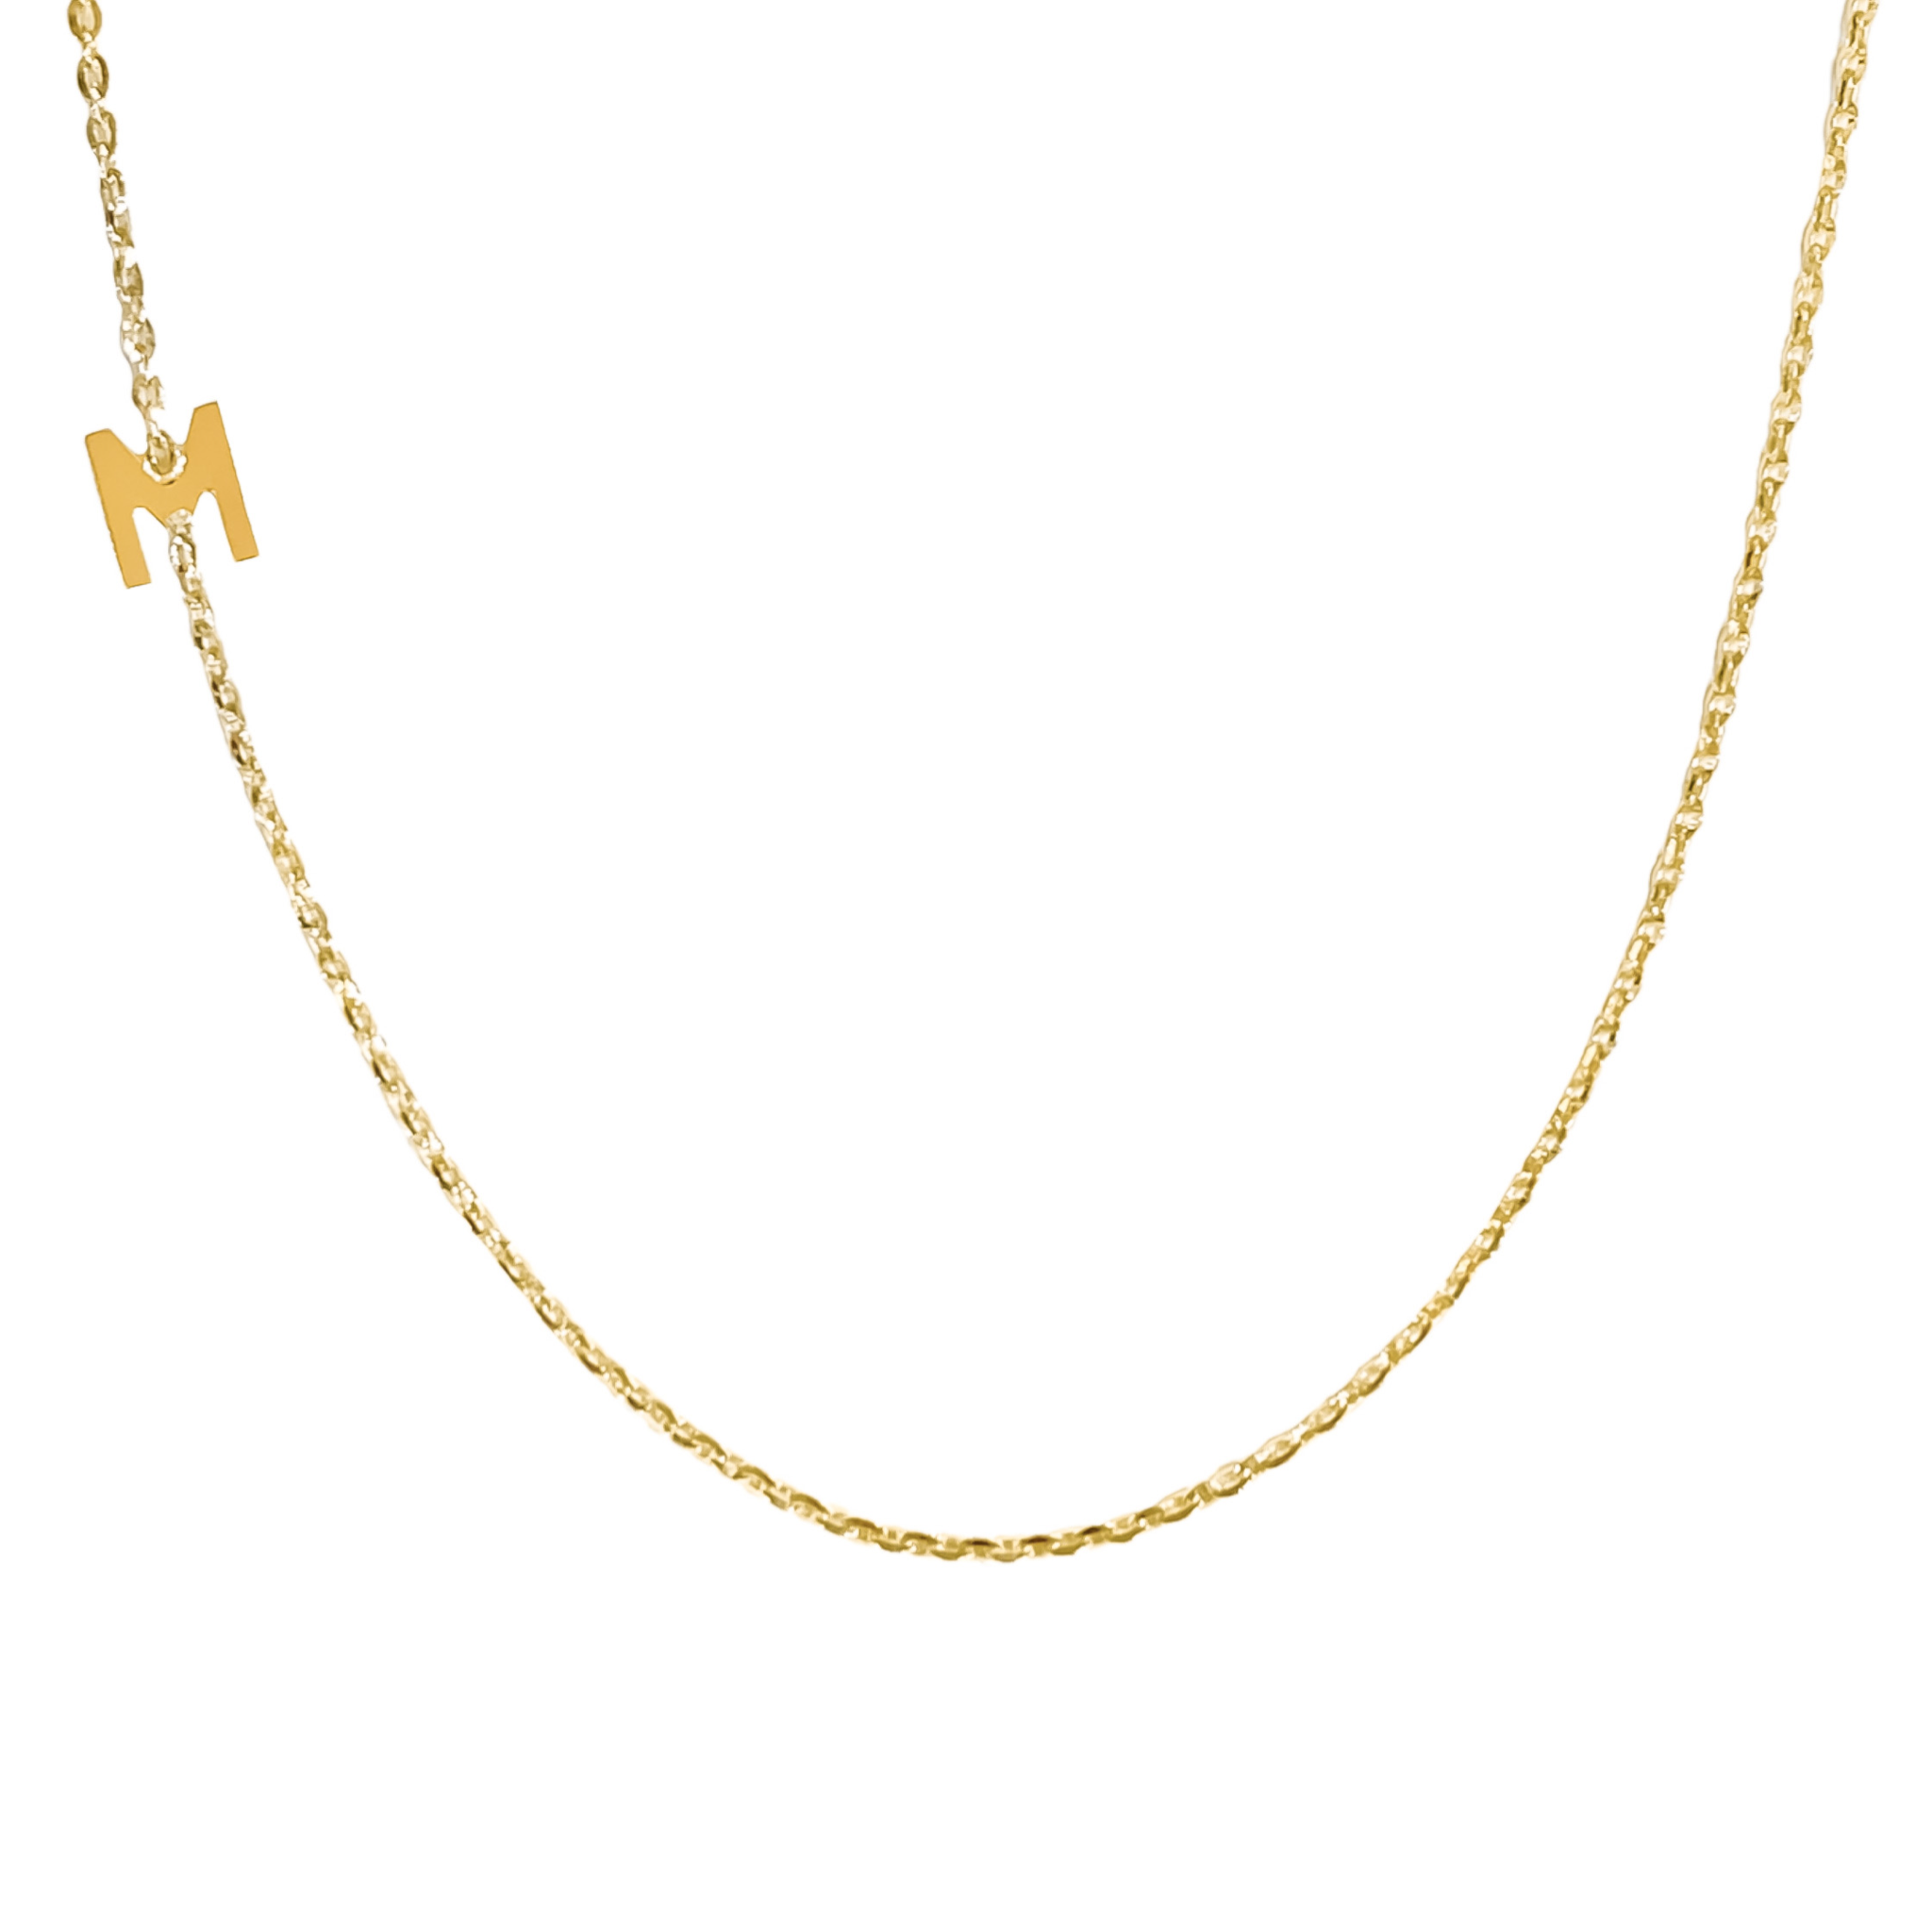 14K YELLOW GOLD FLOATING SIDE SERIF NITIAL NECKLACE